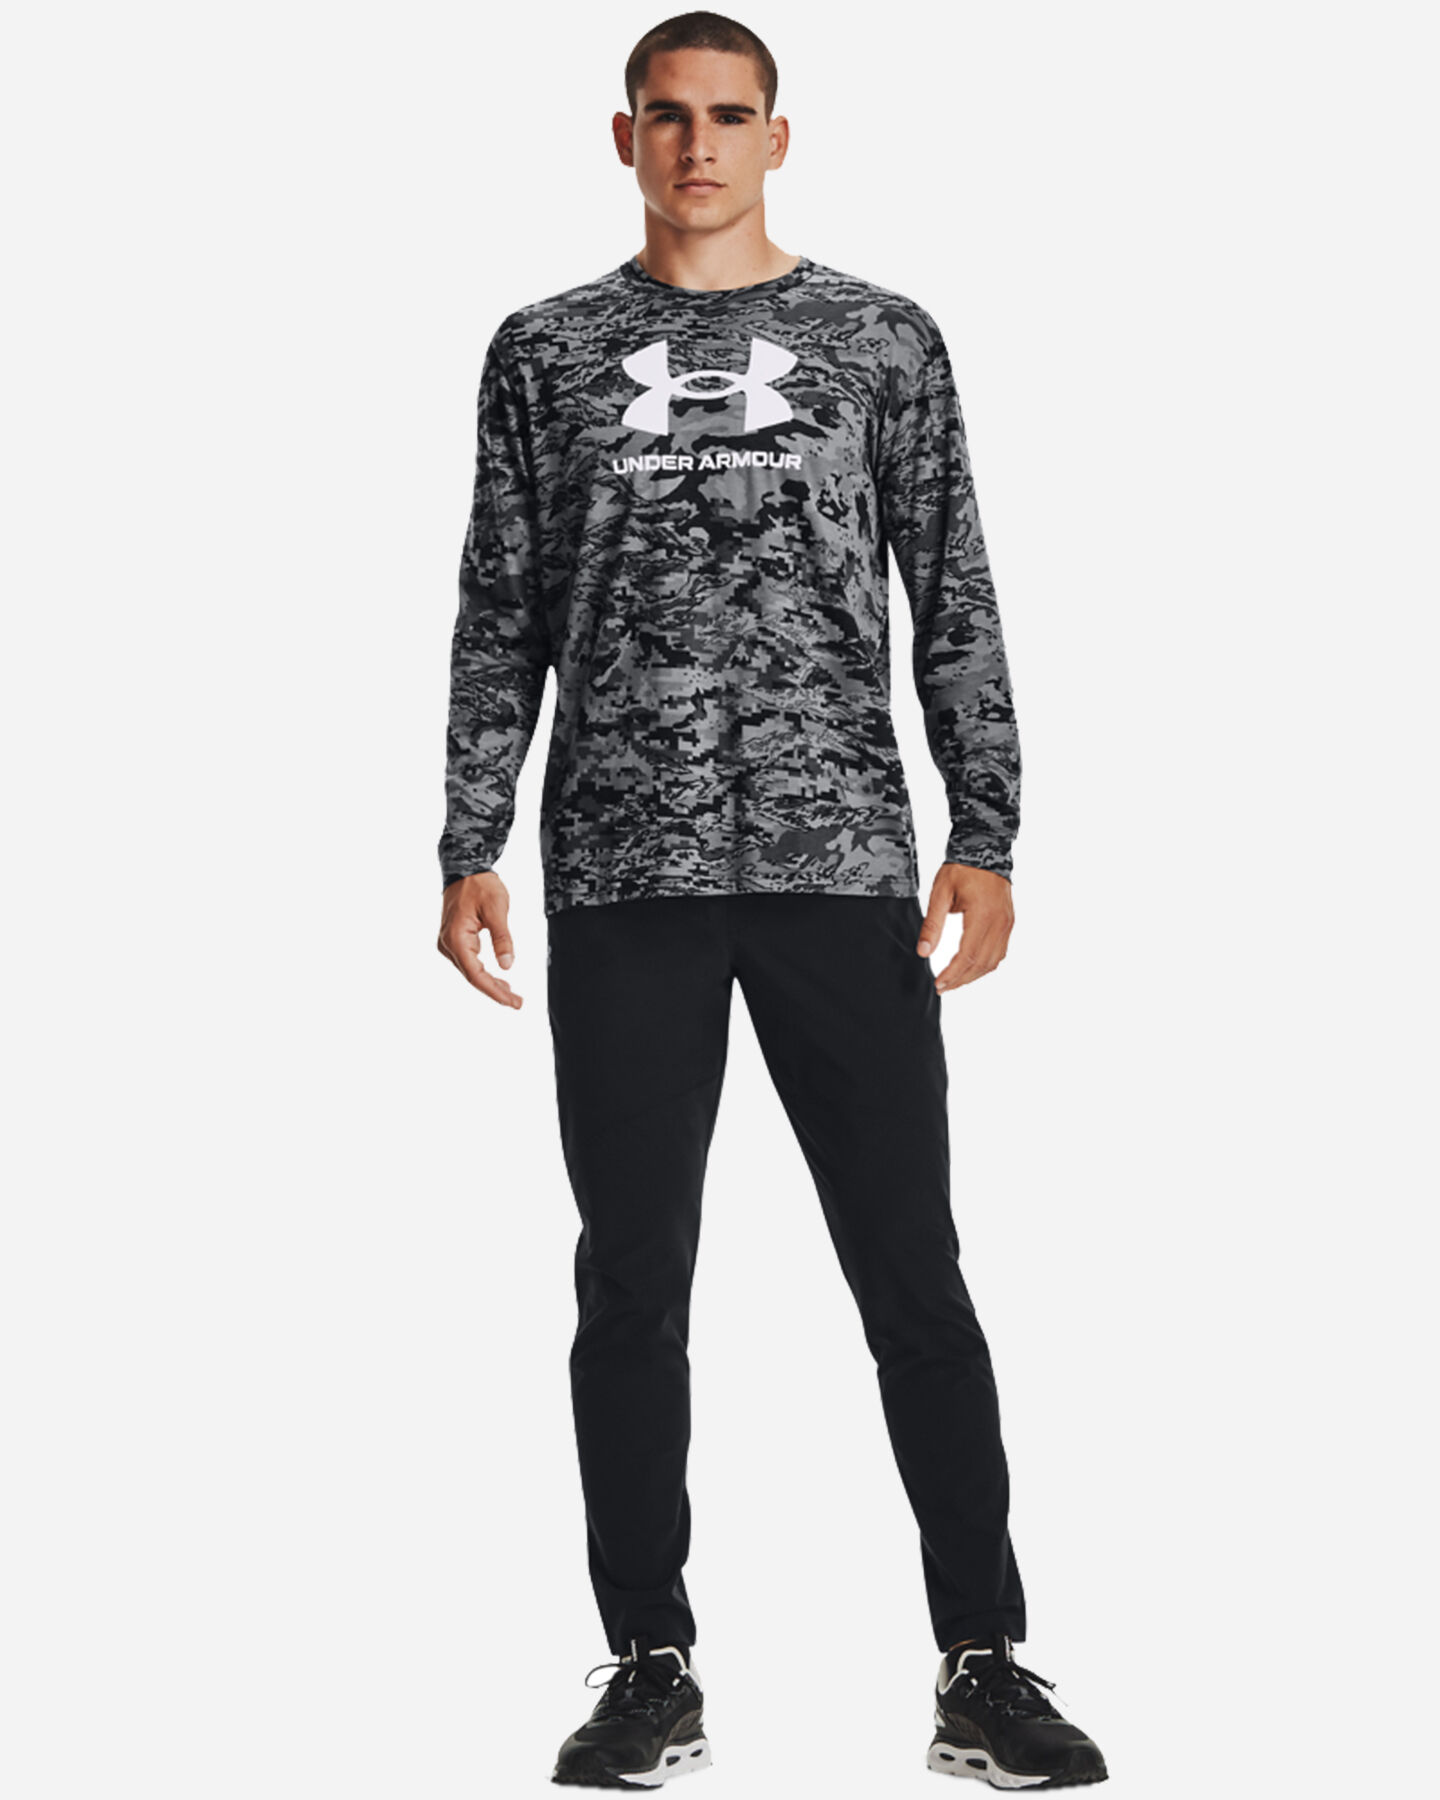  Pantalone training UNDER ARMOUR STRETCH WOVEN M S5336577|0001|XS scatto 4